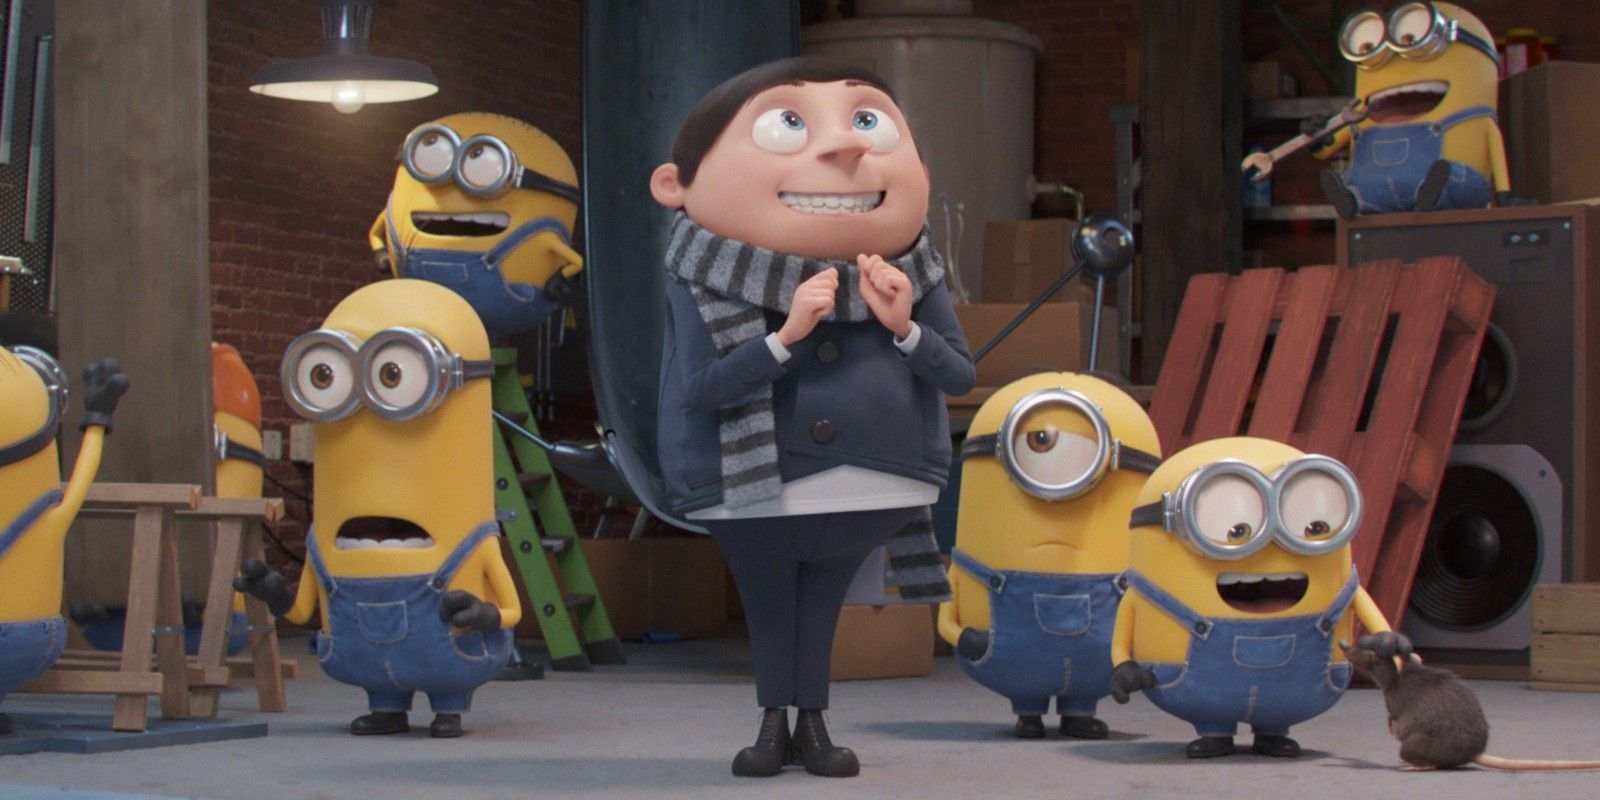 Minions: The Rise of Gru”: A fun addition to the series